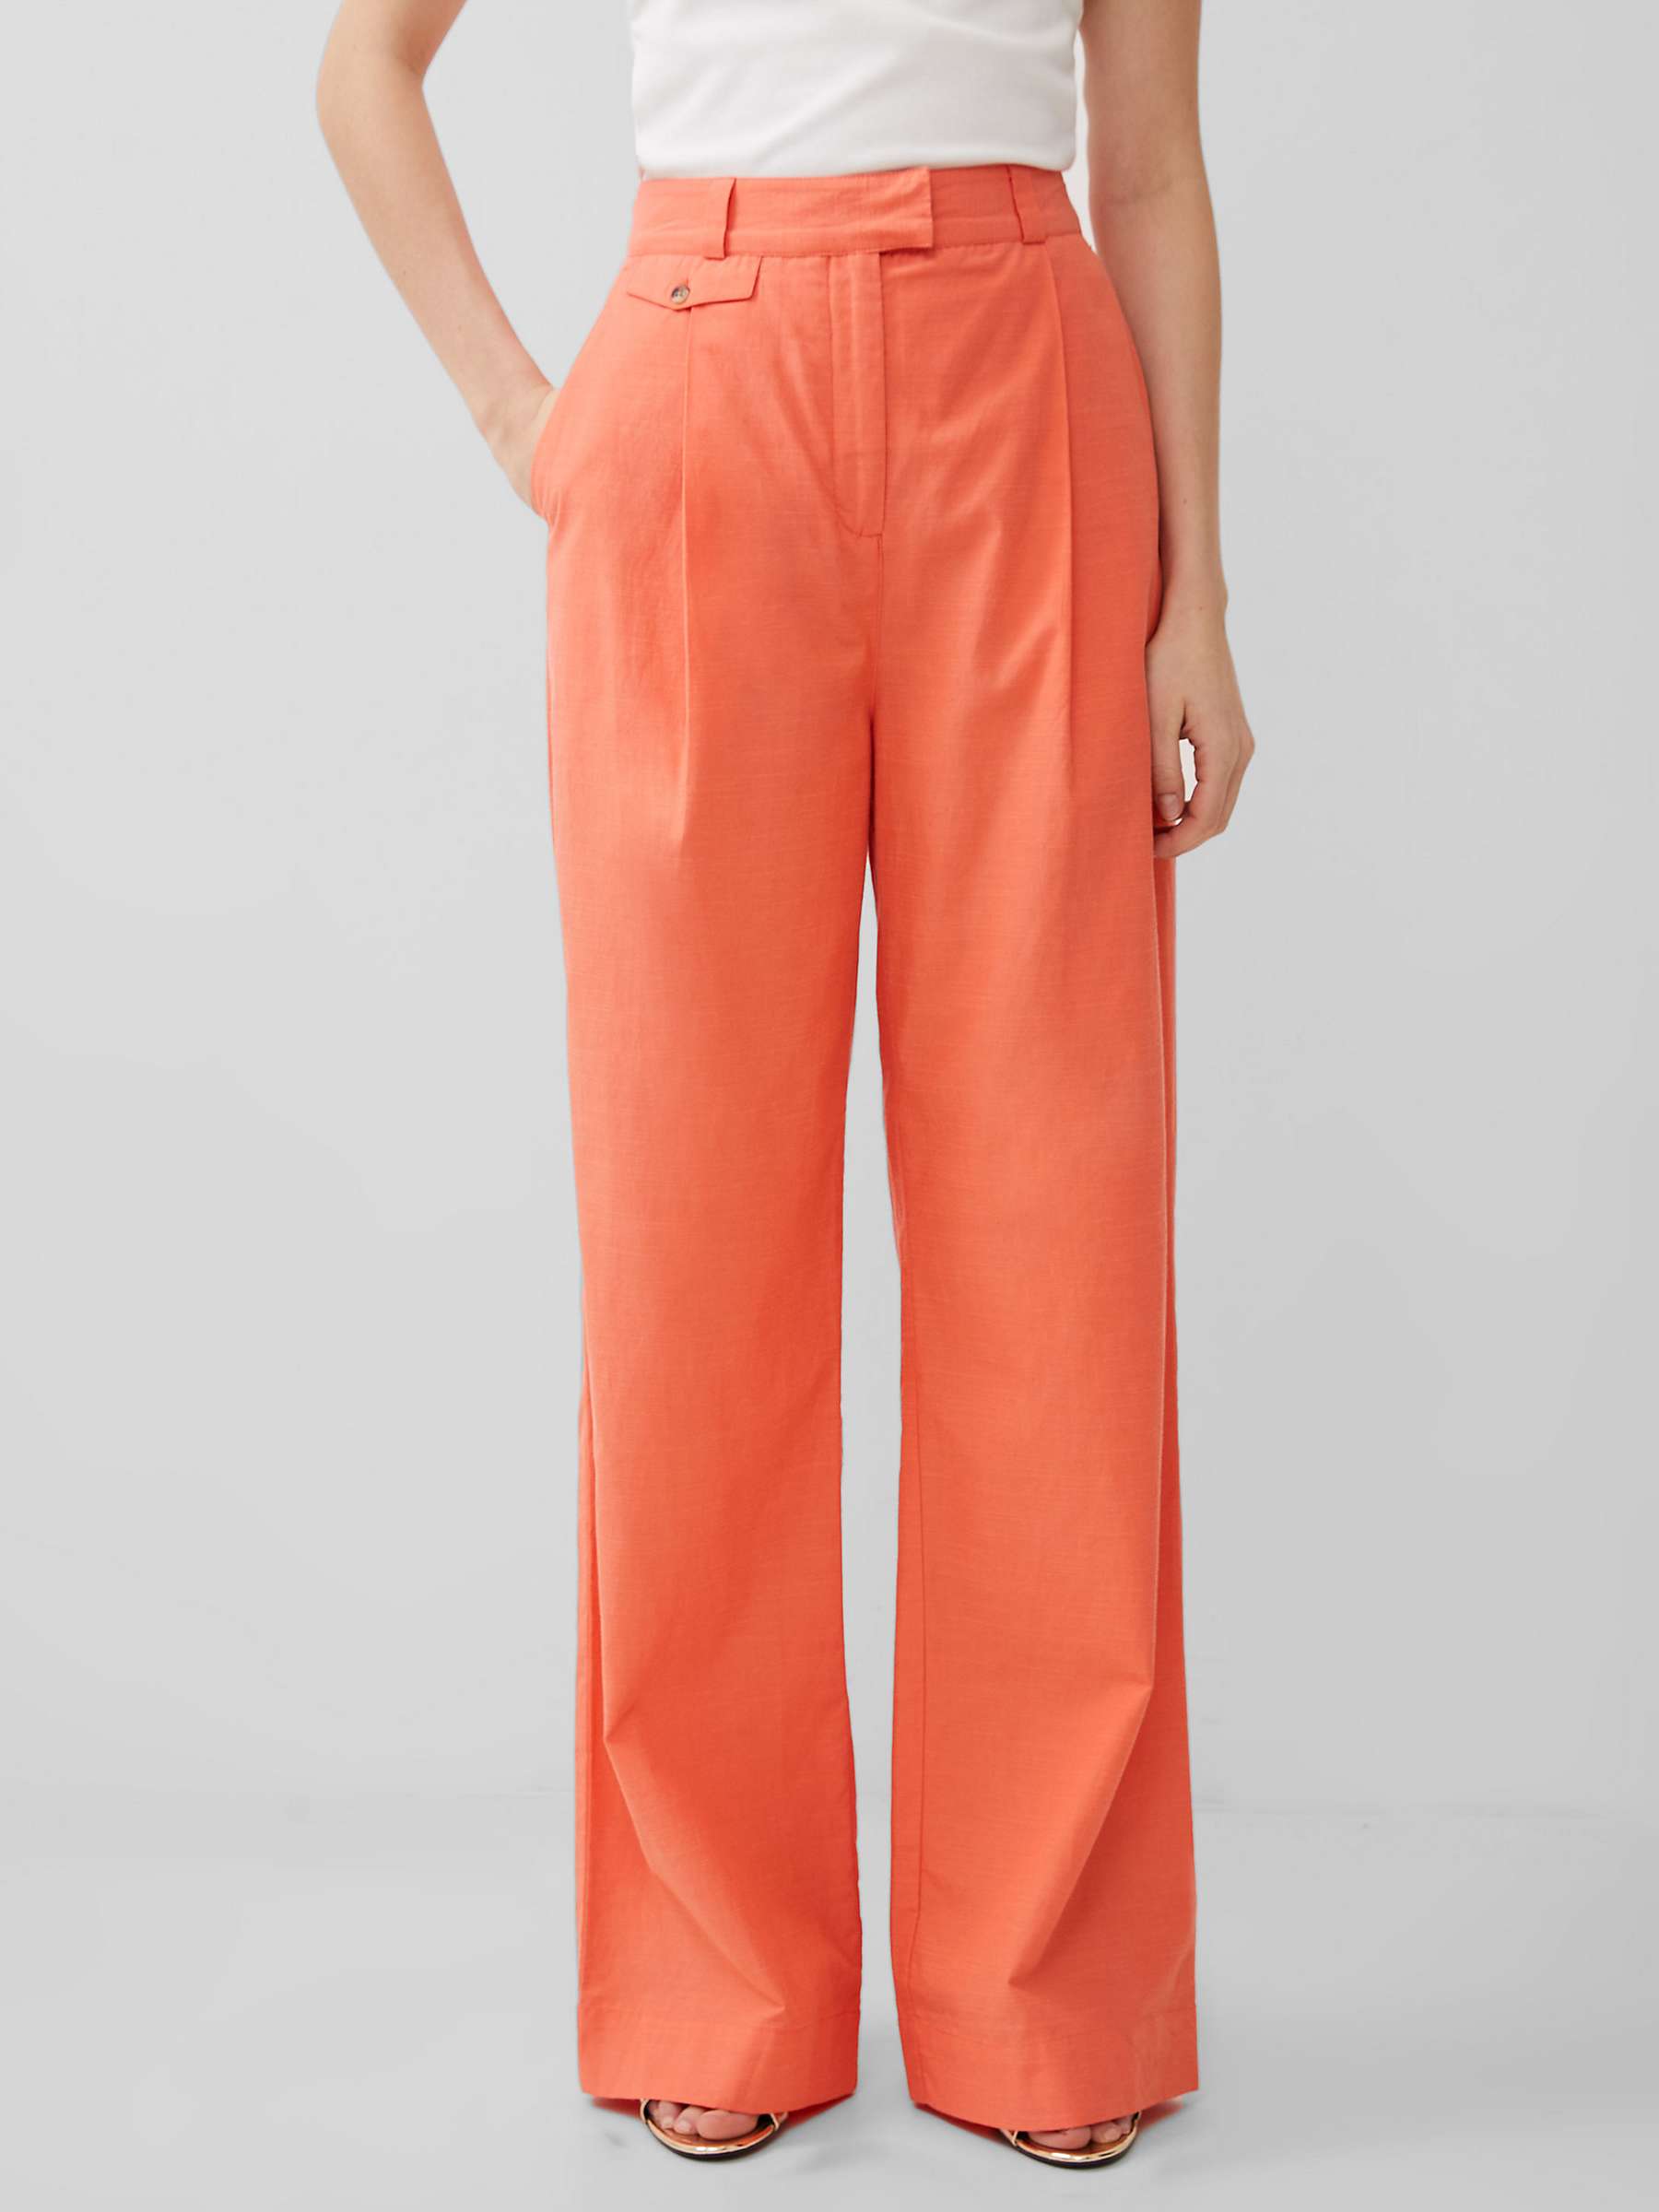 Buy French Connection Alania City Trousers, Coral Online at johnlewis.com